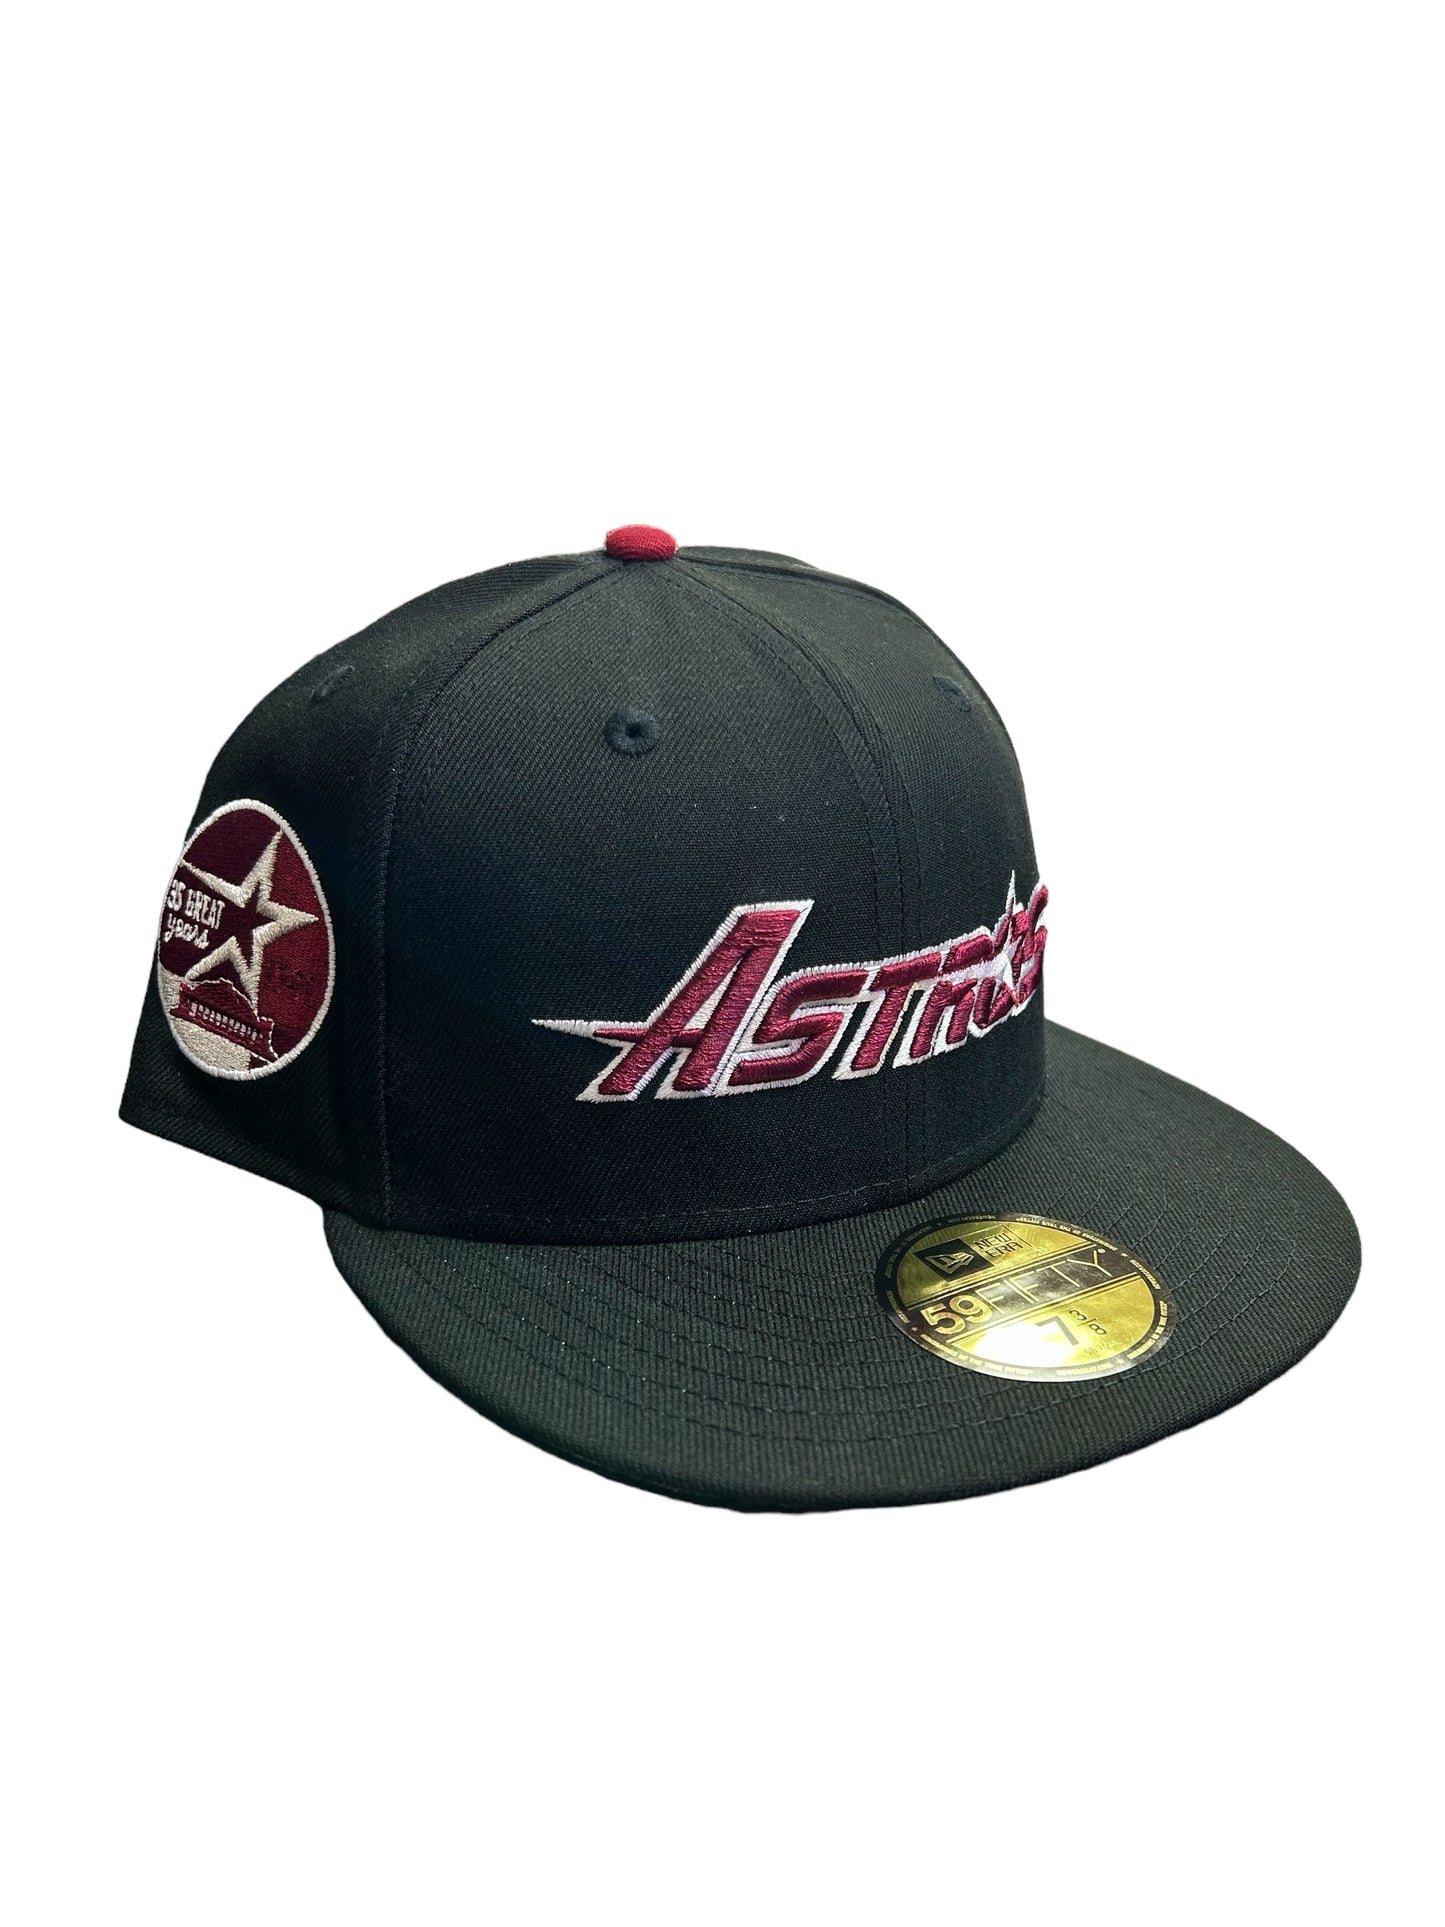 Houston Astros Spell Out Black/Grey Hat